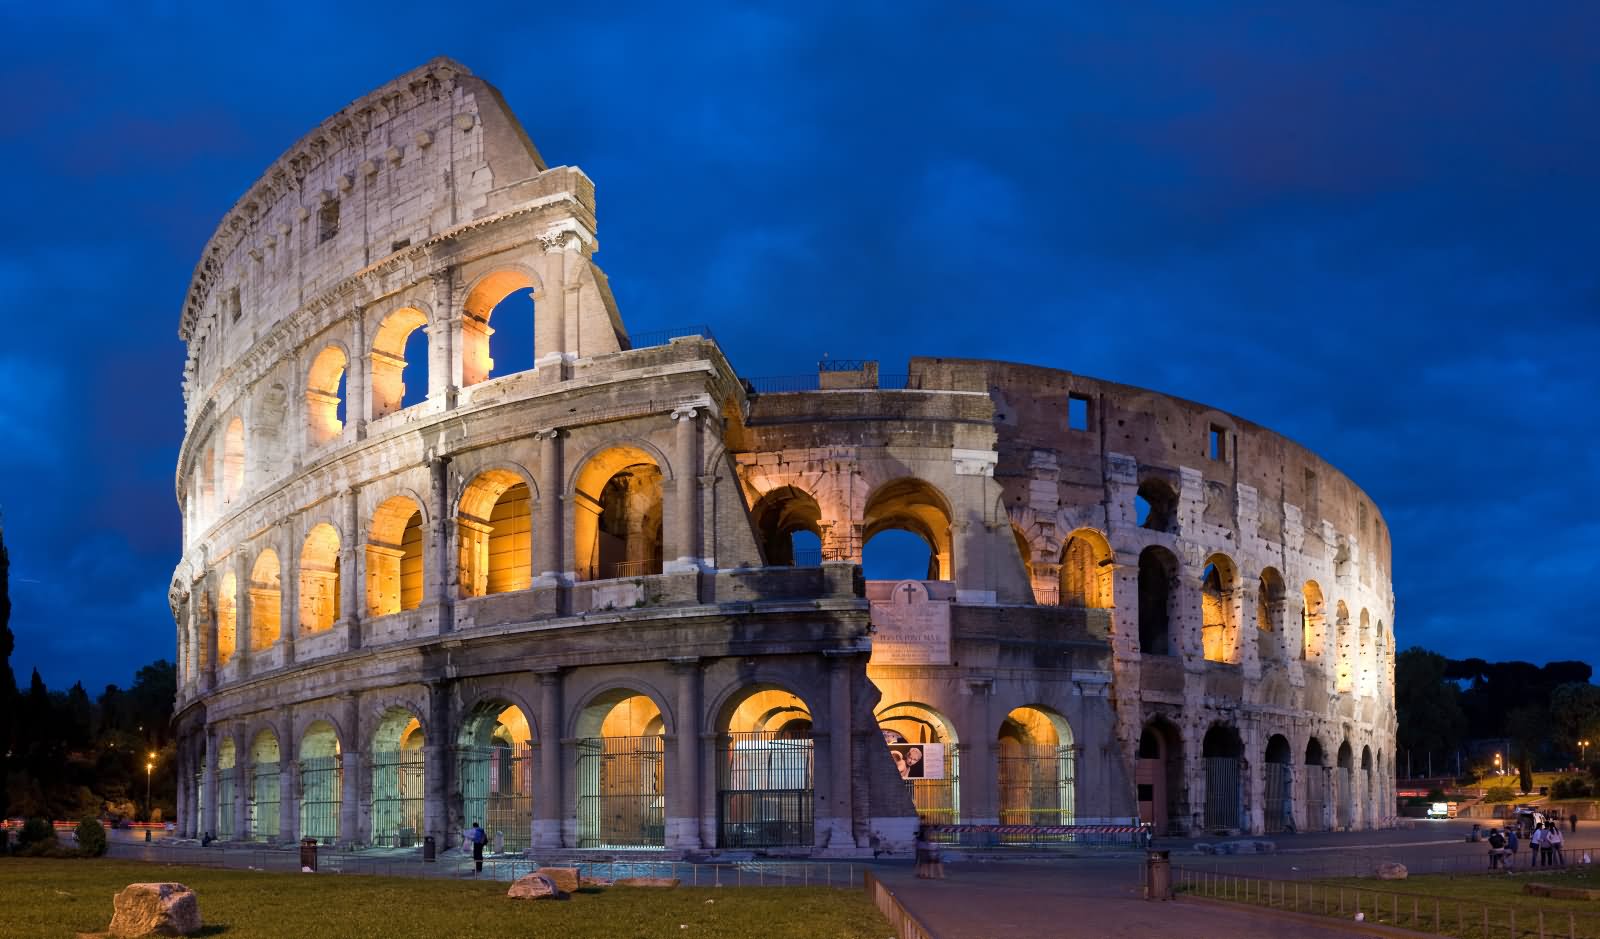 The Colosseum Night Picture